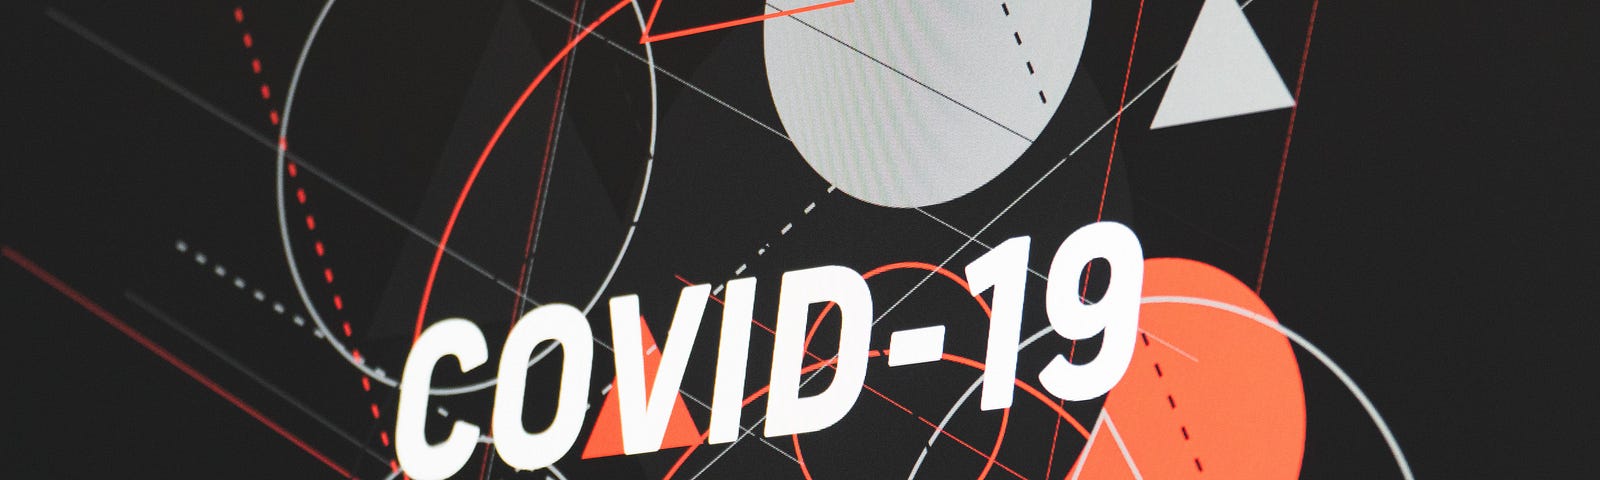 Text of “CoVID-19” on top of shapes in red and white